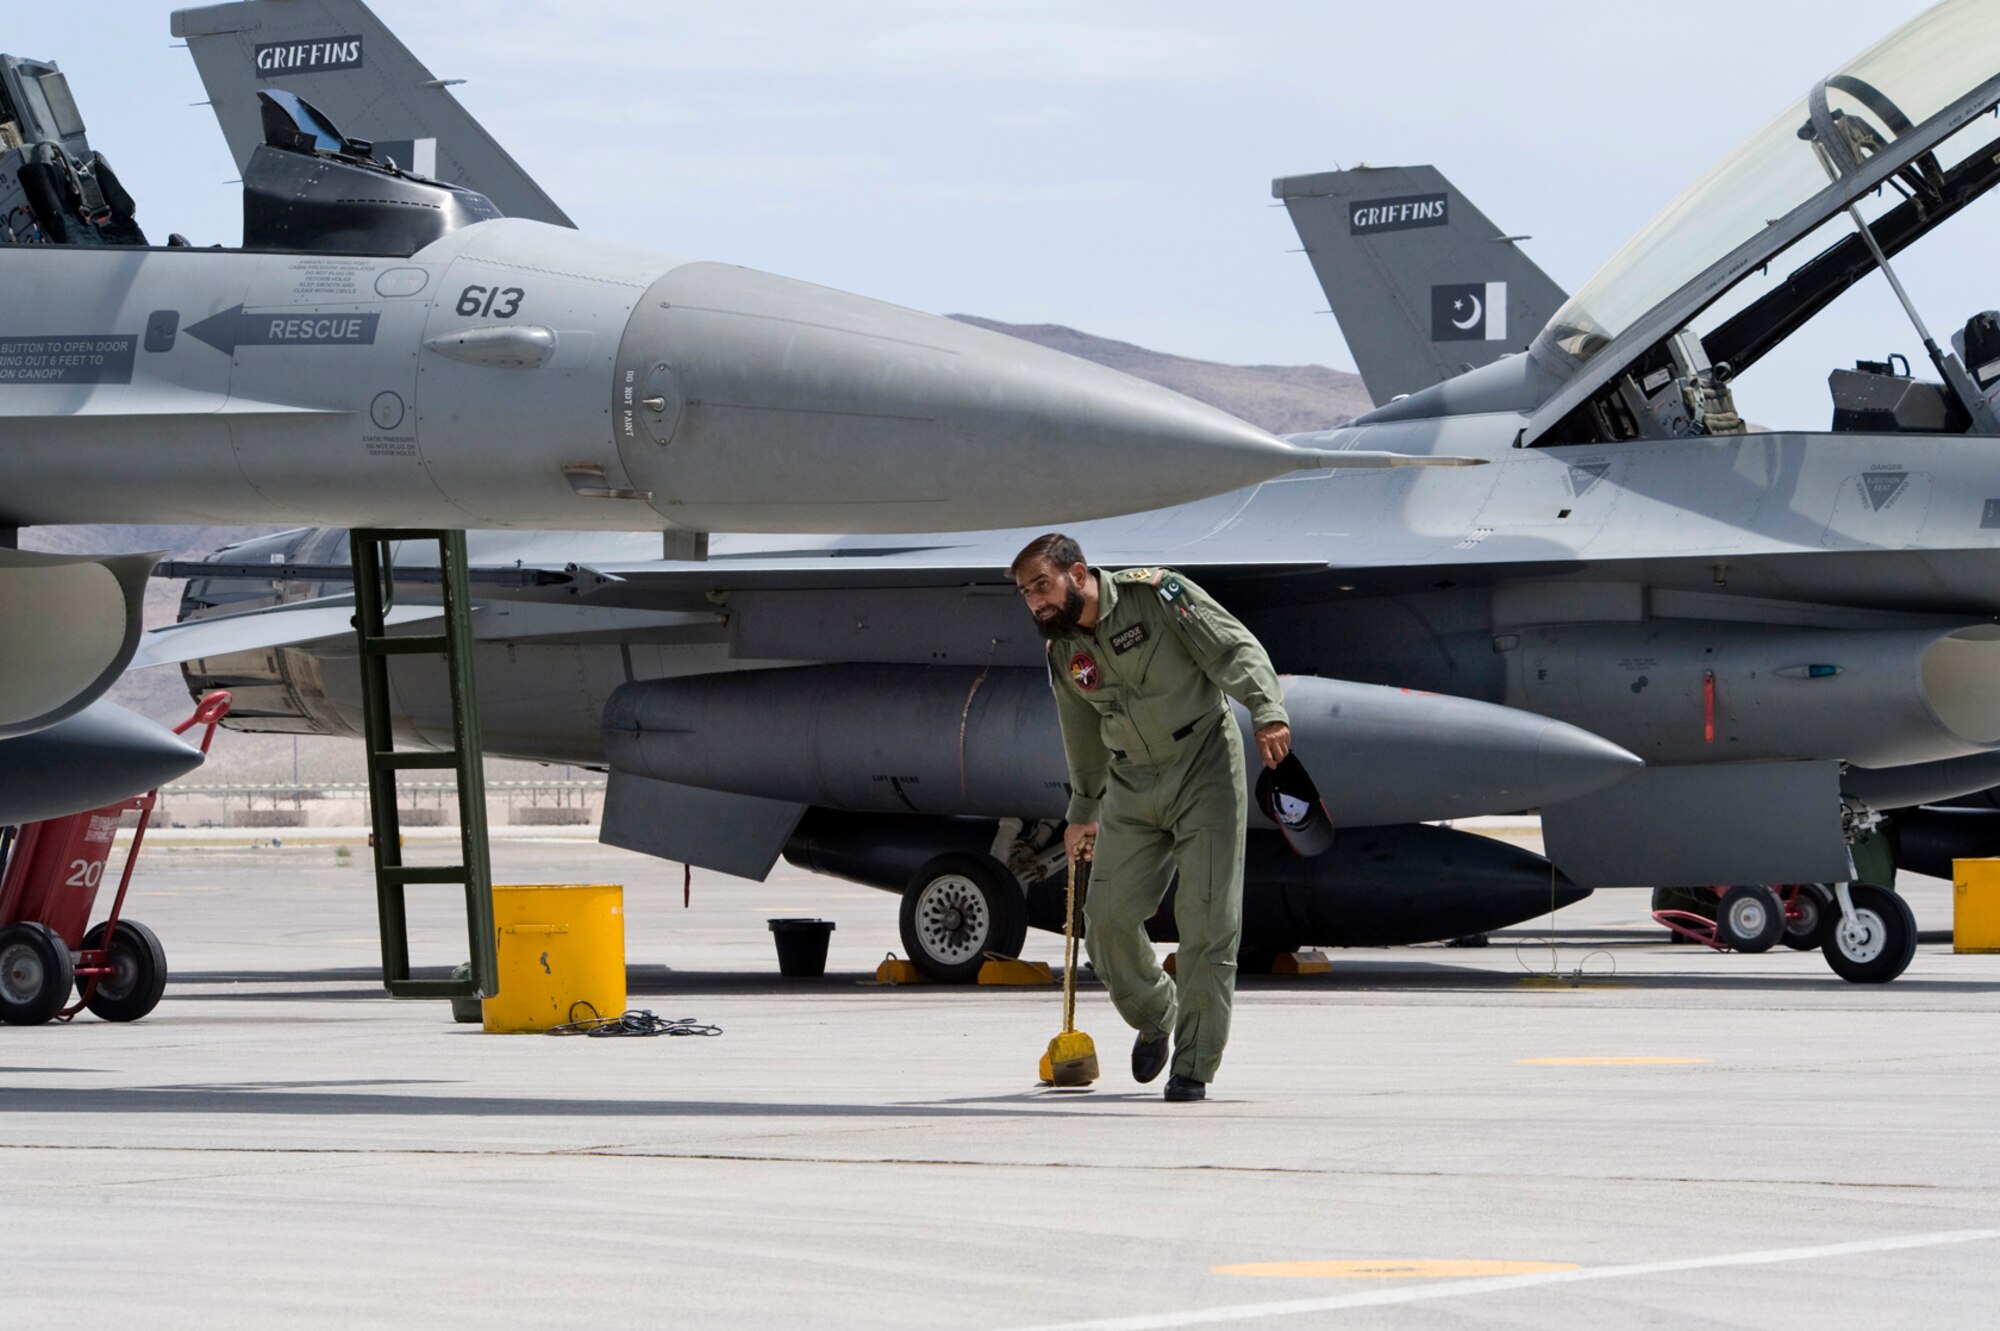 NELLIS AIR FORCE BASE, Nev.-- A Pakistan Air Force crew chief chalks an F-16 upon arrival for Red Flag 10-4 July 16.  The U.S. Air Force is hosting approximately 100 Pakistan Air Force pilots, maintainers and support personnel at Nellis Air Force Base for the world's premier large force employment and integration exercise July 17-31. This is the Pakistan Air Force's first time participating in Red Flag. (U.S. Air Force Photo by Lawrence Crespo)
